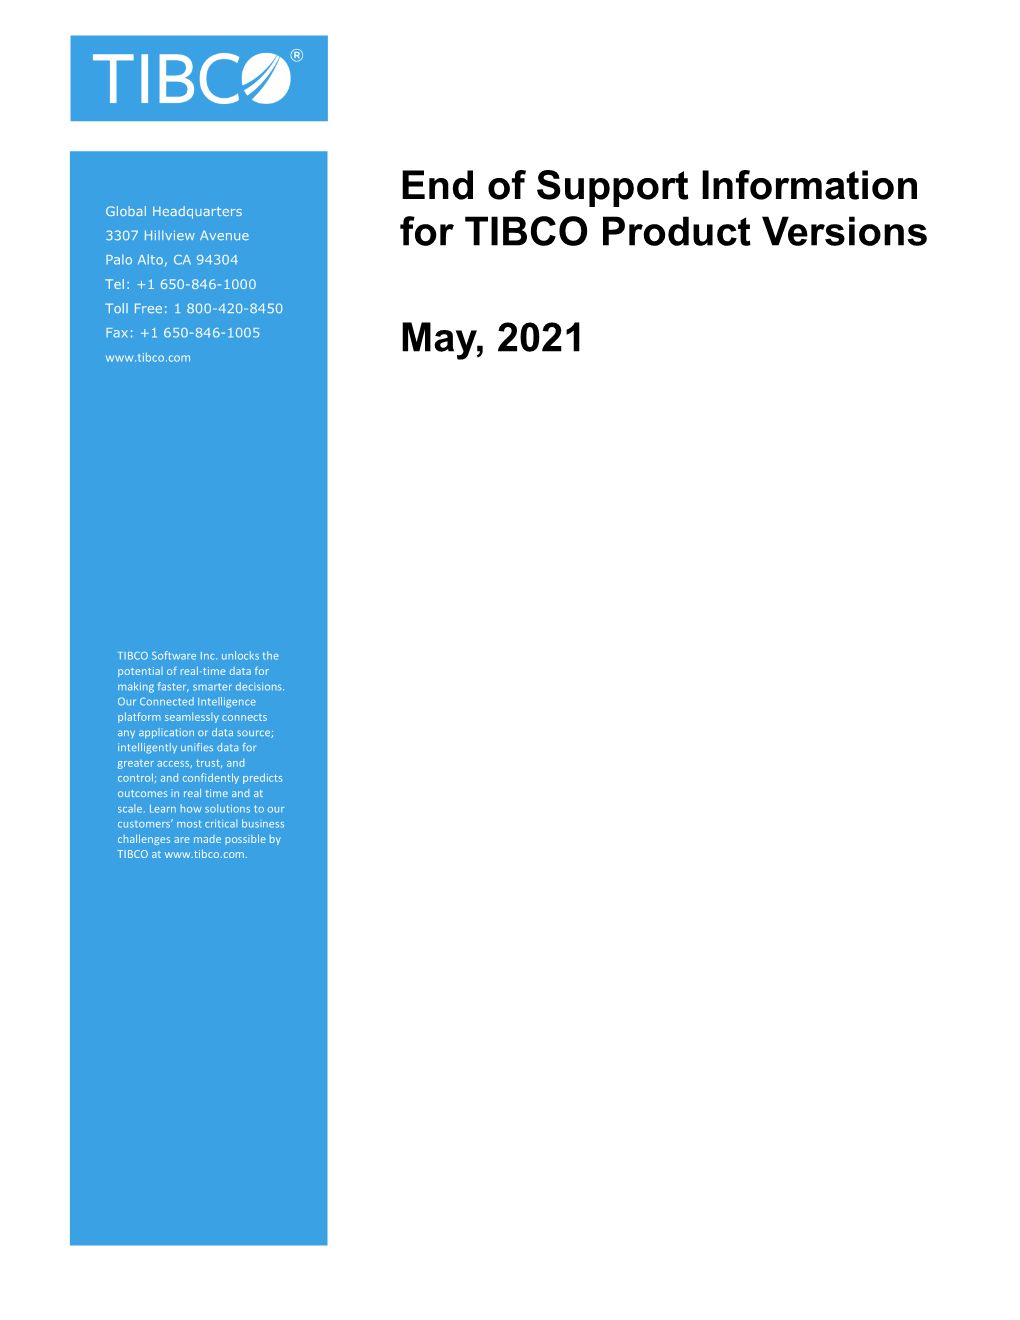 End of Support Information for TIBCO Product Versions May, 2021